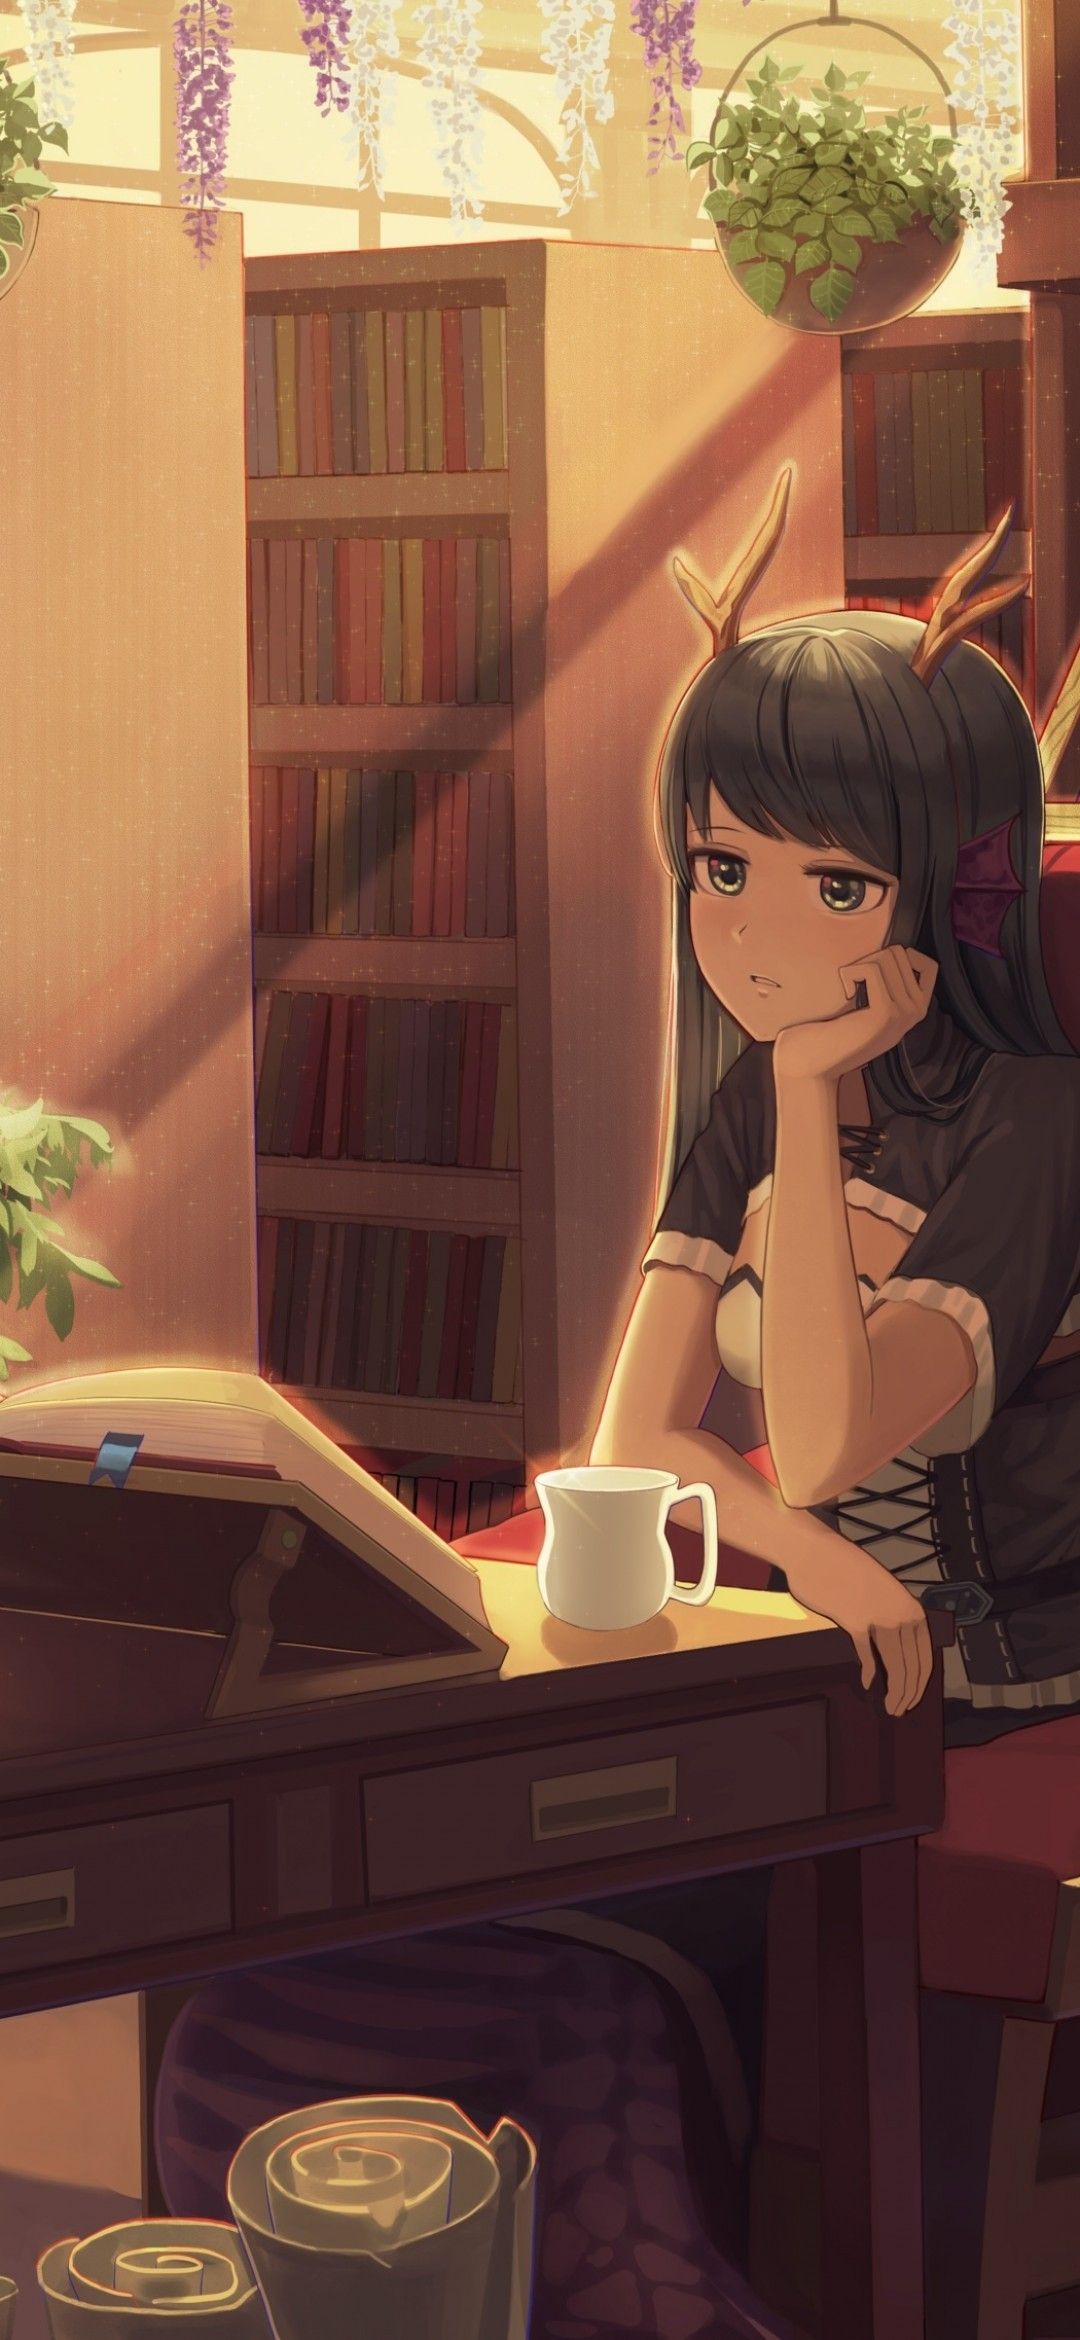 Anime Studying Wallpapers - Wallpaper Cave